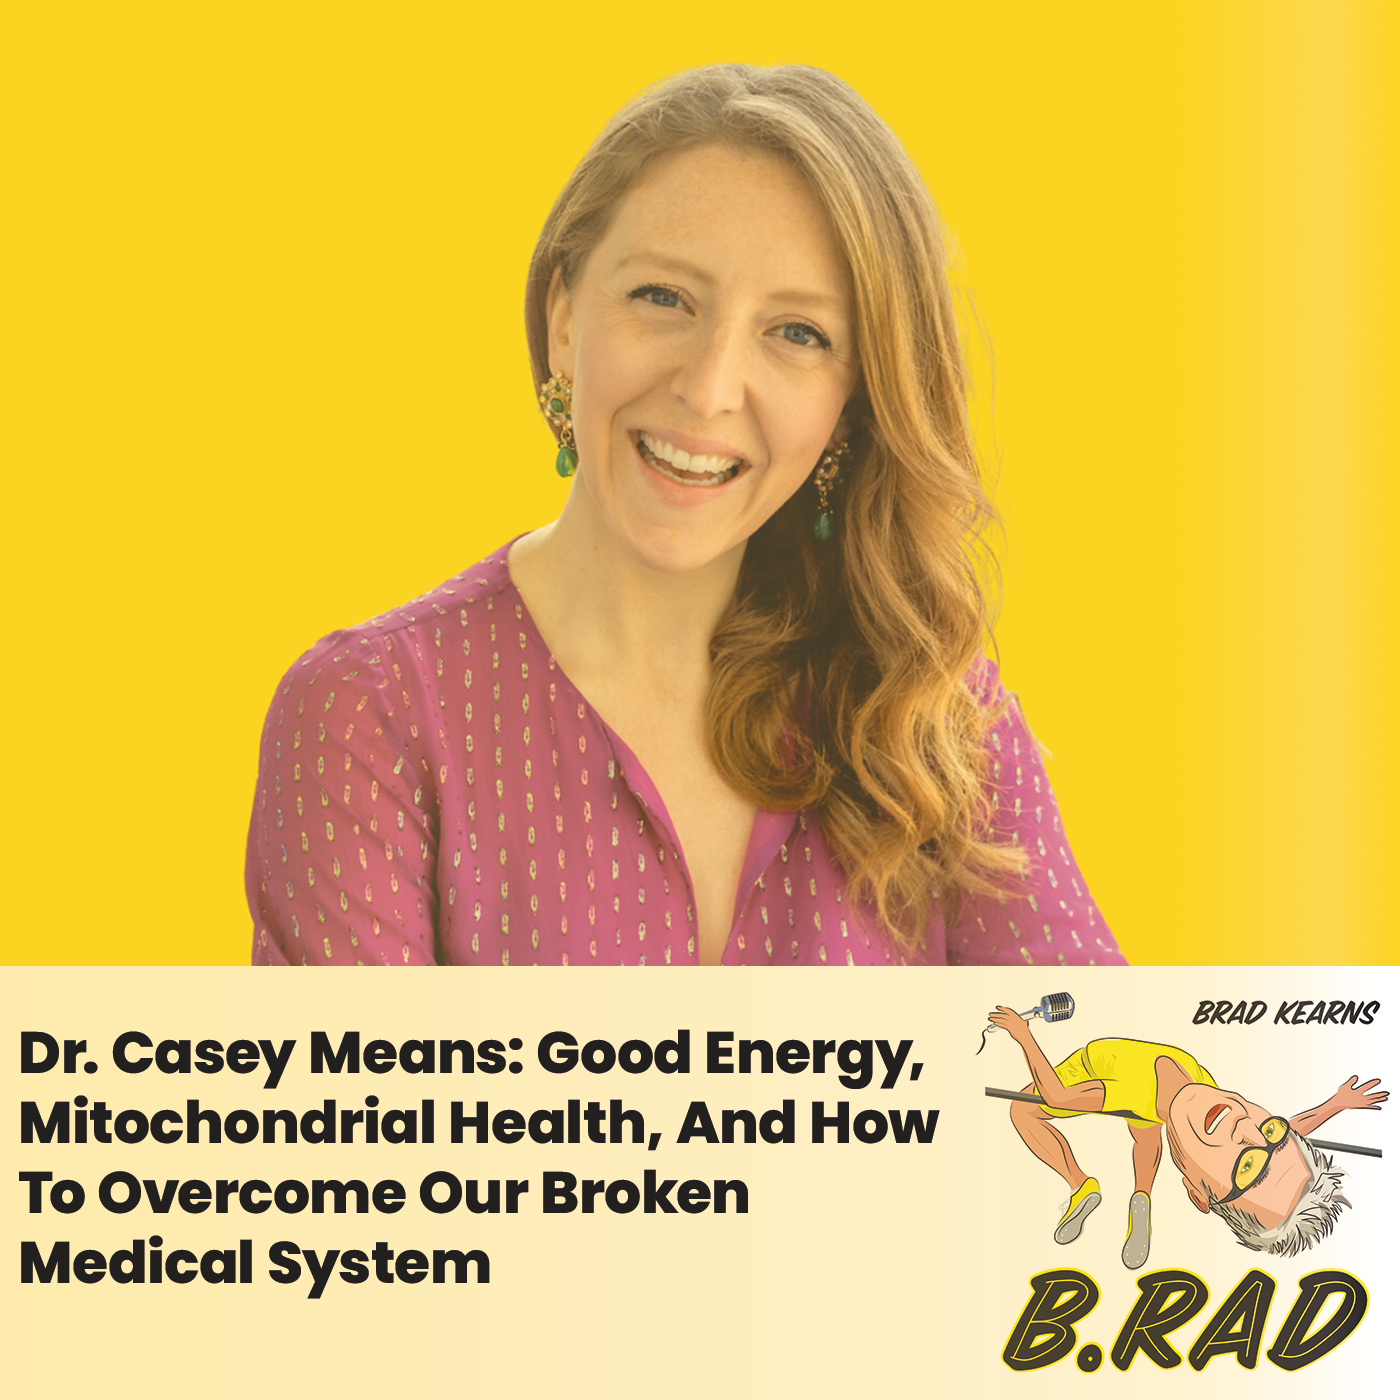 Dr. Casey Means: Good Energy, Mitochondrial Health, And How To Overcome Our Broken Medical System